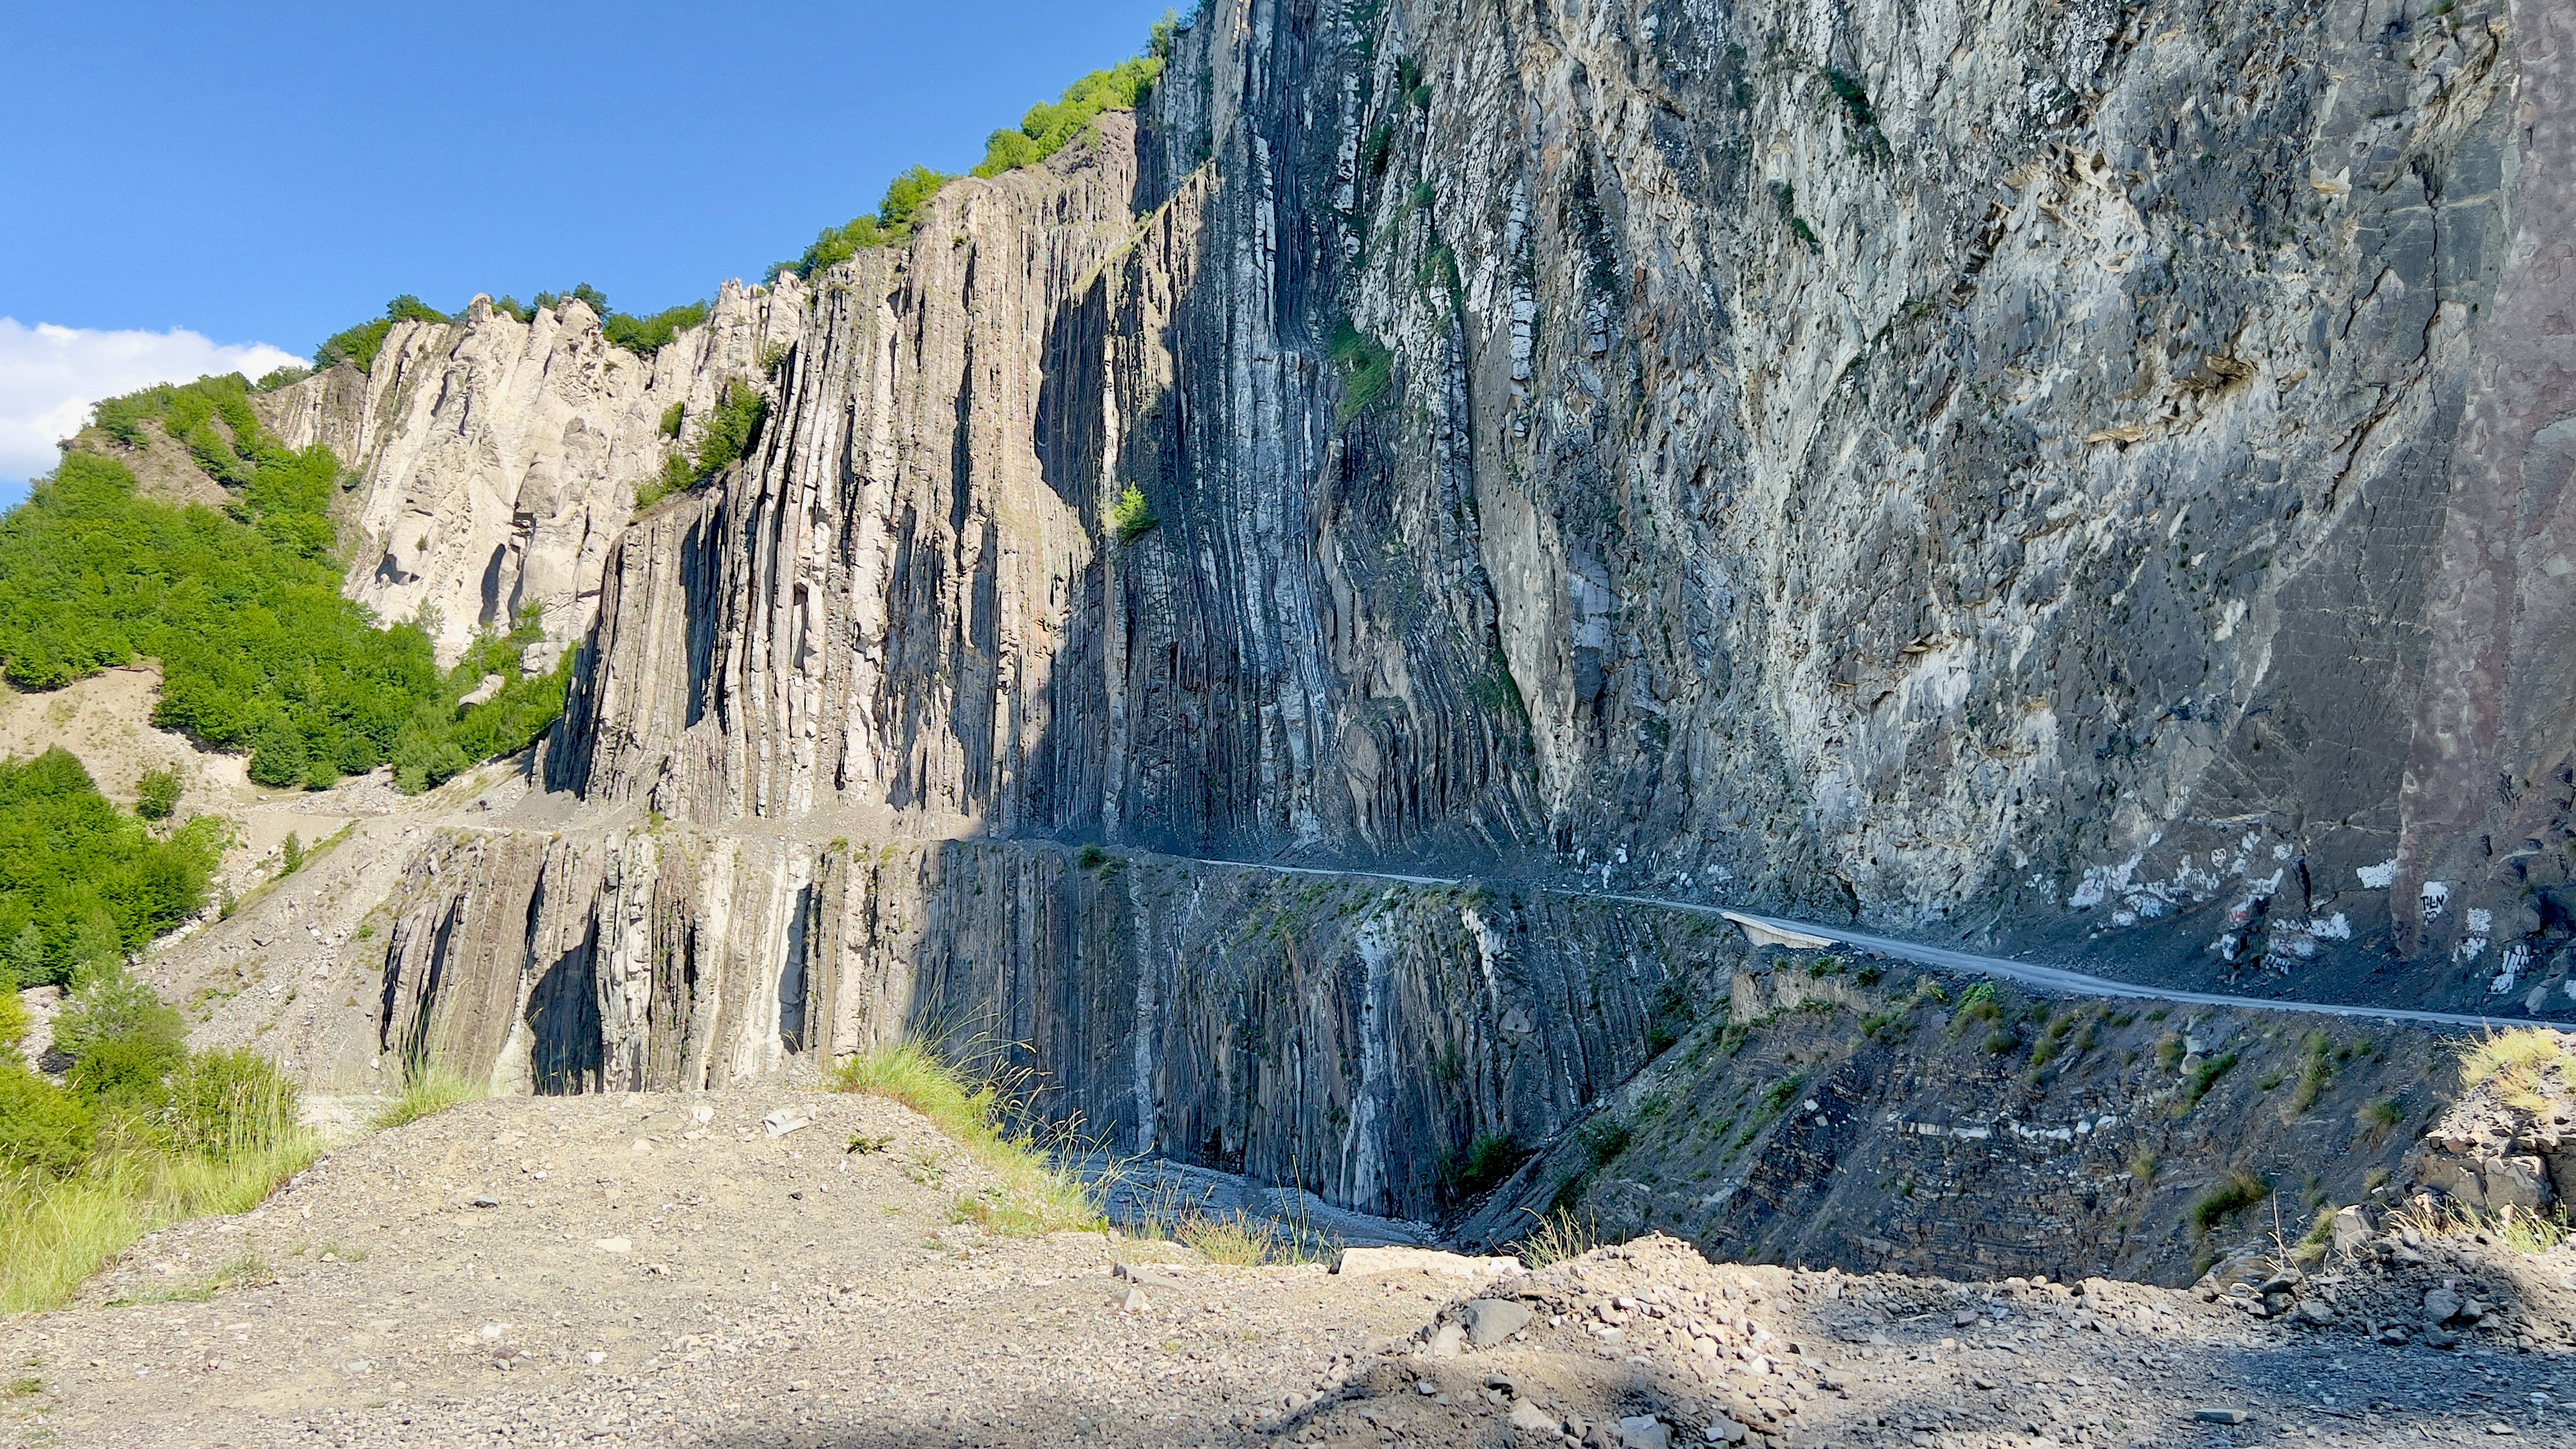 The sometime hair-raising road to the Azerbaijani mountain village of Lahic, is sometimes carved into sheer cliff. Photo: Peter Neville-Hadley